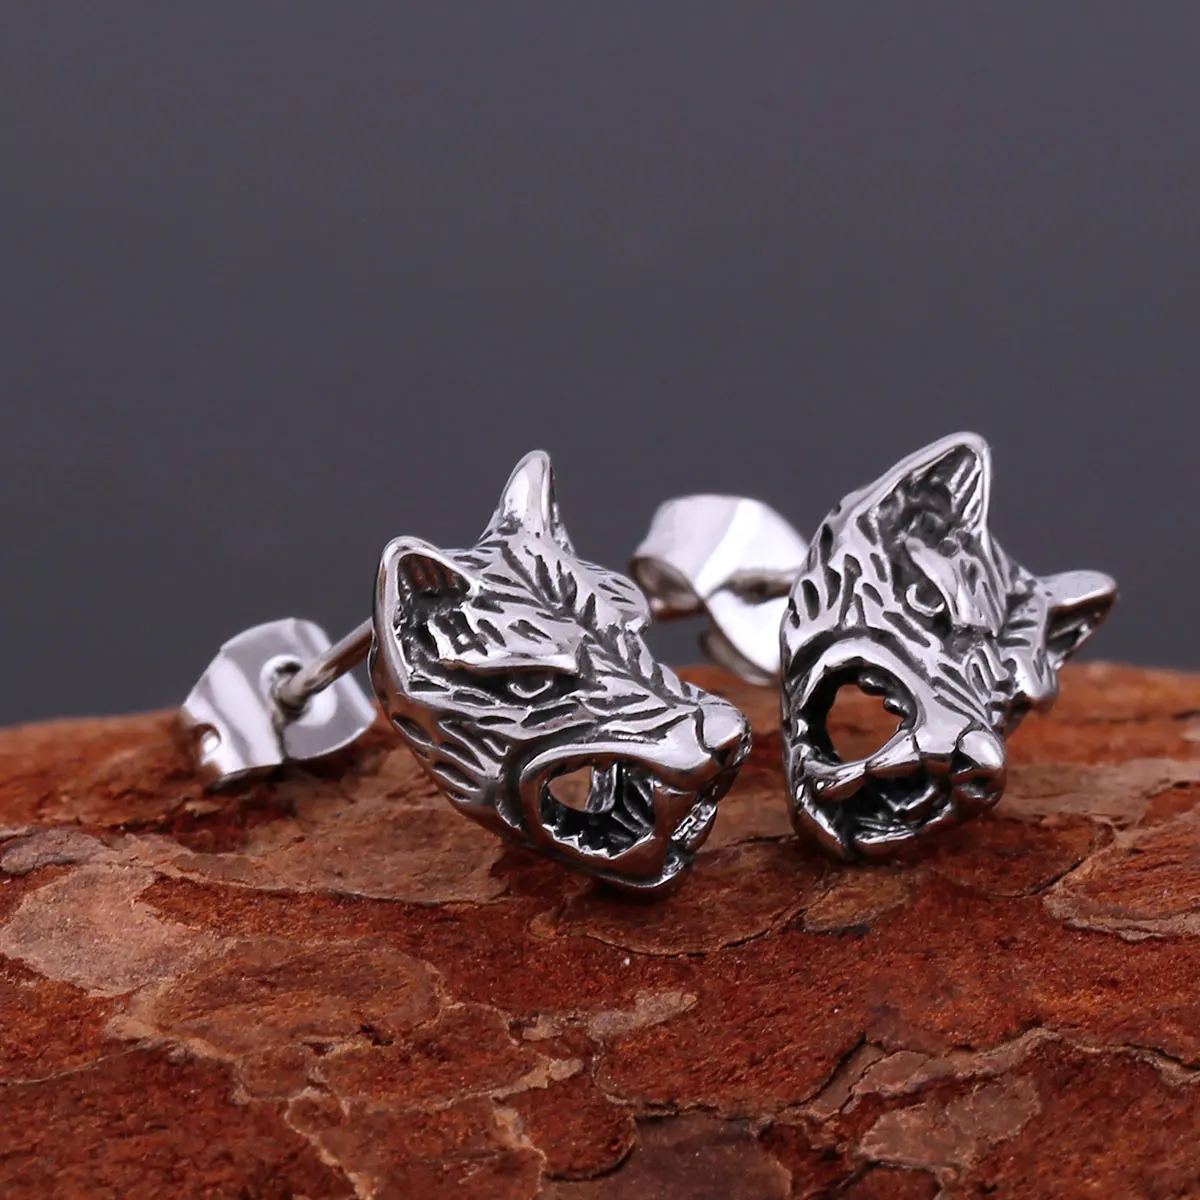 

Hip Hop Creative Stainless Steel Retro Wolf Head Viking Earrings Nordic Men's Animal Amulet Jewelry Teen Accessories Charm Gift